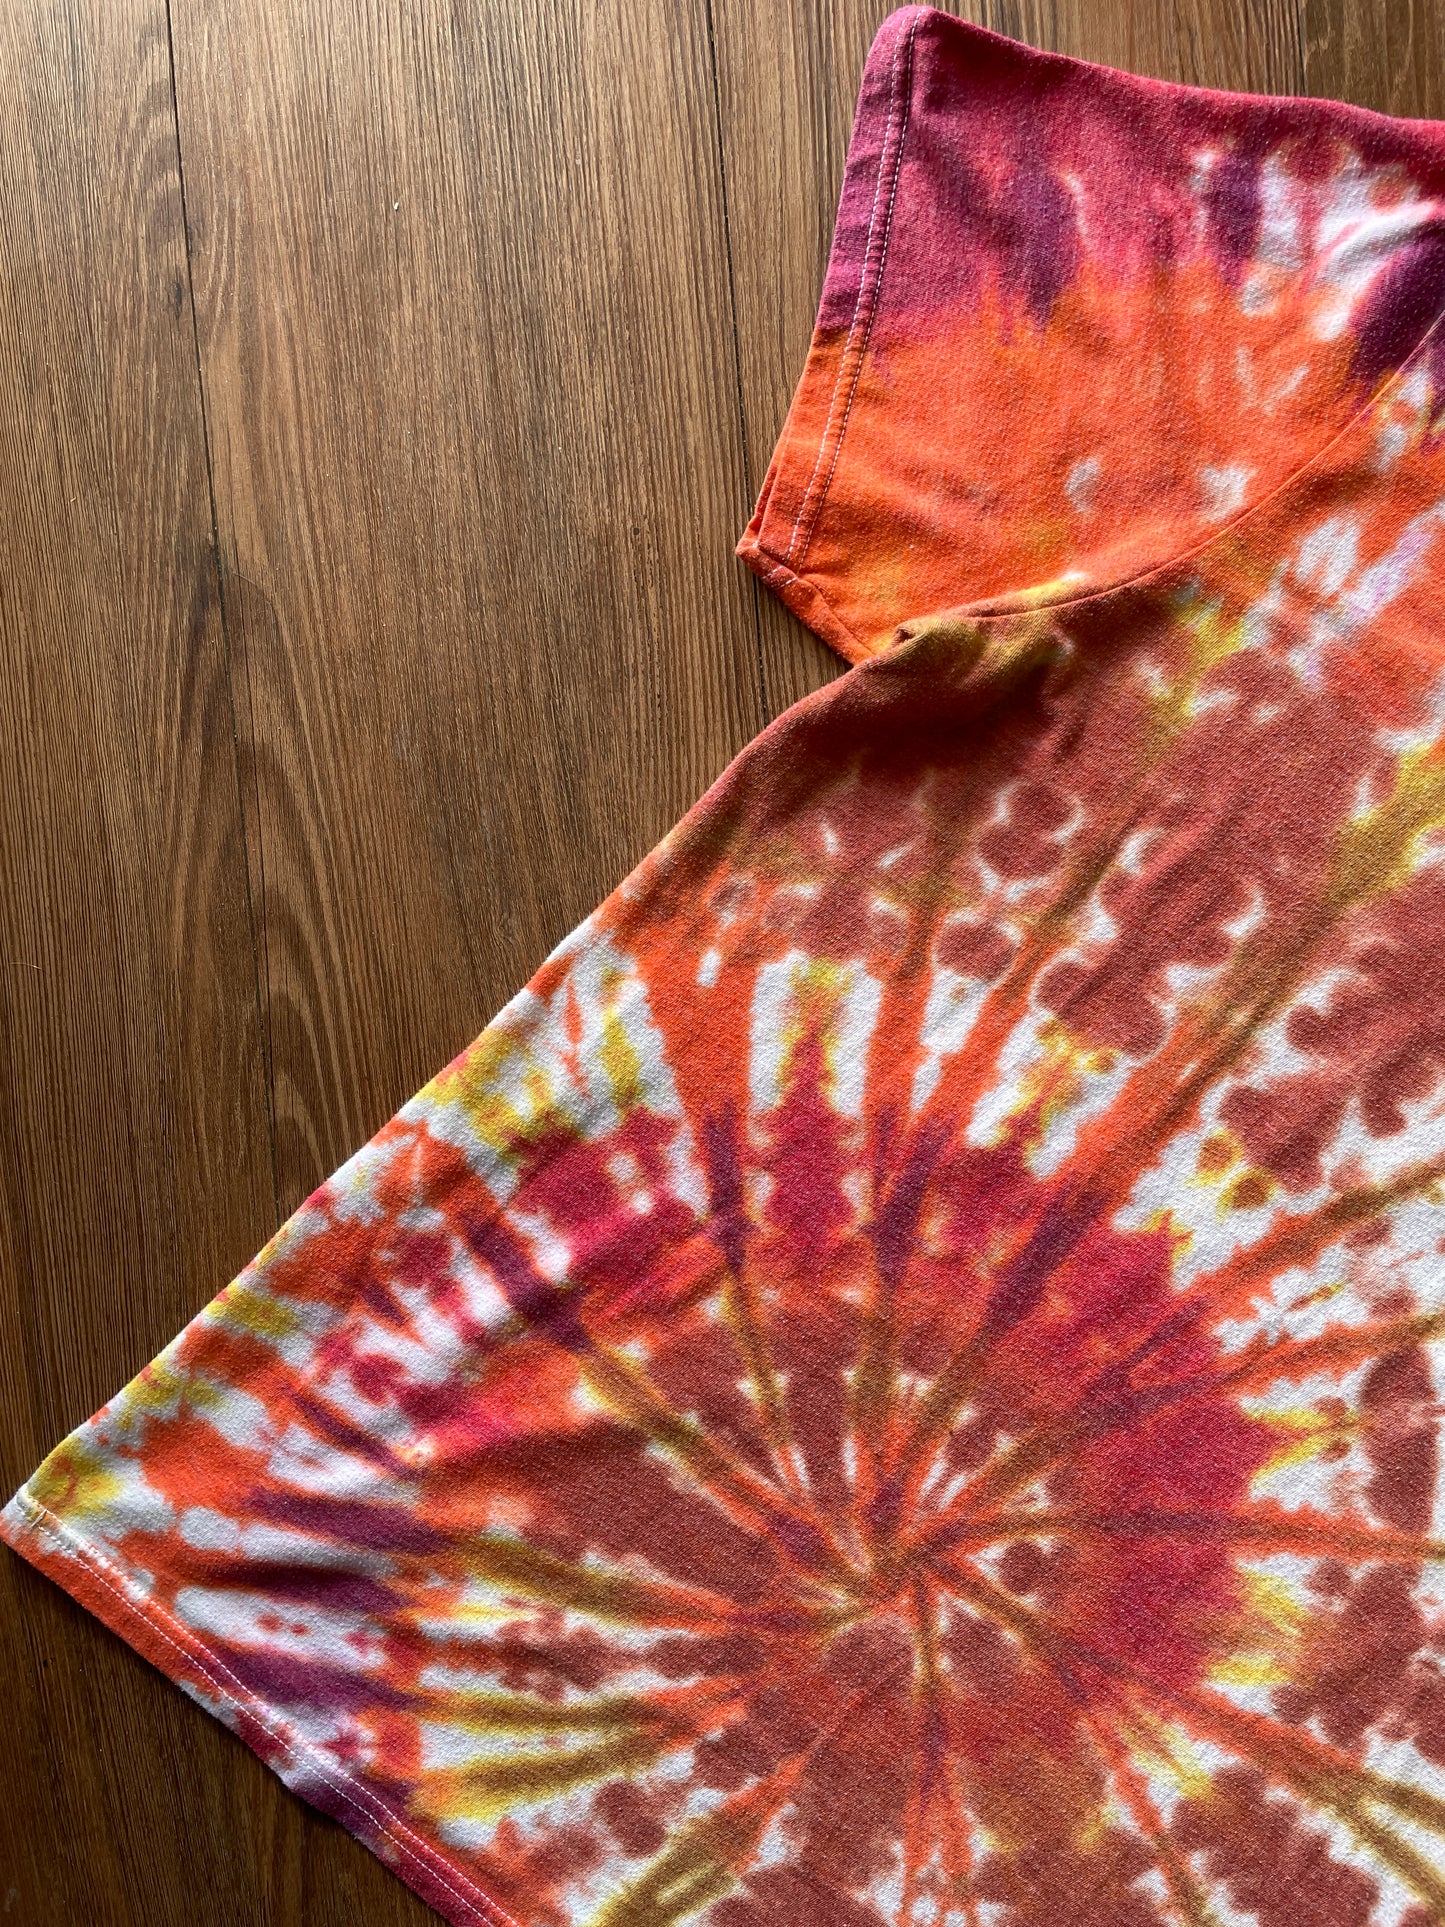 LARGE Men’s adidas Three Stripes Handmade Tie Dye T-Shirt | One-Of-a-Kind Orange, Red, and Yellow SpiralShort Sleeve